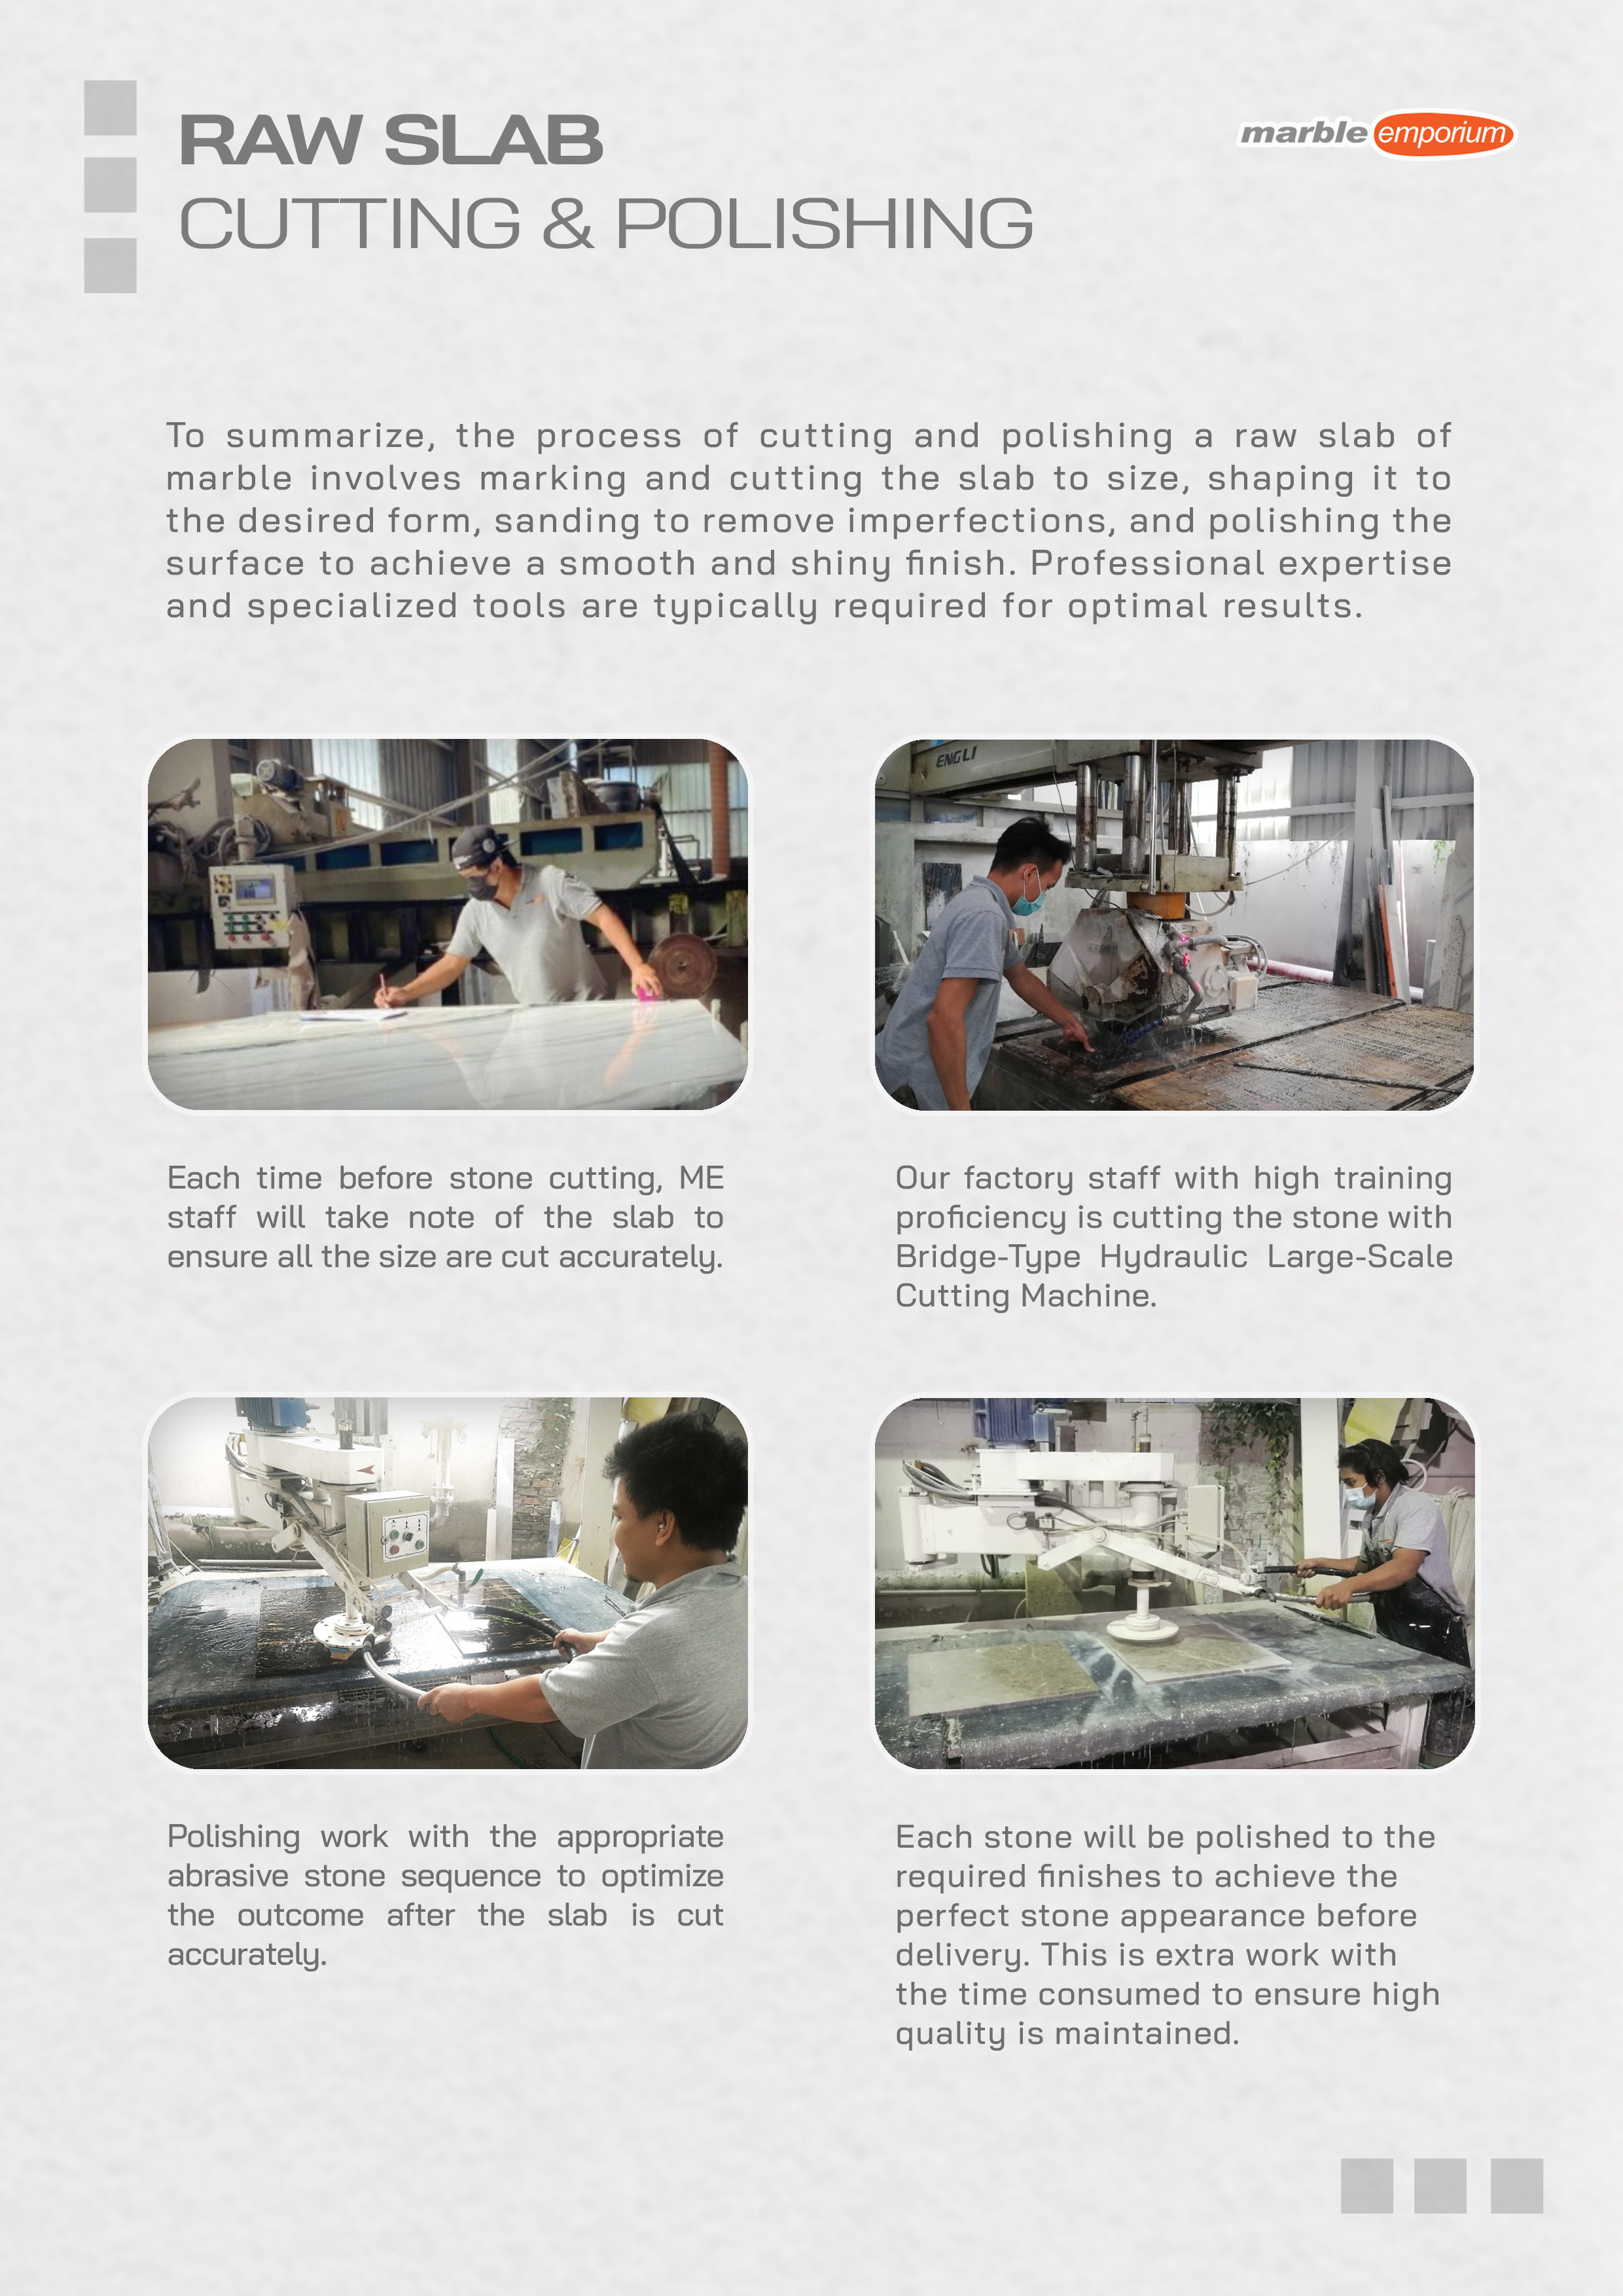 Marble Emporium | How we work page 18 - Raw Slab Cutting & Polishing - To summarize, the process of cutting and polishing a raw slab of marble involves marking and cutting the slab to size, shaping it to the desired form, sanding to remove imperfections, and polishing the surface to achieve a smooth and shiny finish. Professional expertise and specialized tools are typically required for optimal results. Each time before stone cutting, ME staff will take note of the slab to ensure all the sizes are cut accurately. Our factory staff with high training proficiency is cutting the stone with Bridge-Type Hydraulic Large-Scale Cutting Machine. Polishing work with the appropriate abrasive stone sequence to optimize the outcome after the slab is cut accurately. Each stone will be polished to the required finishes to achieve the perfect stone appearance before delivery. This is extra work with the time consumed to ensure high quality is maintained.